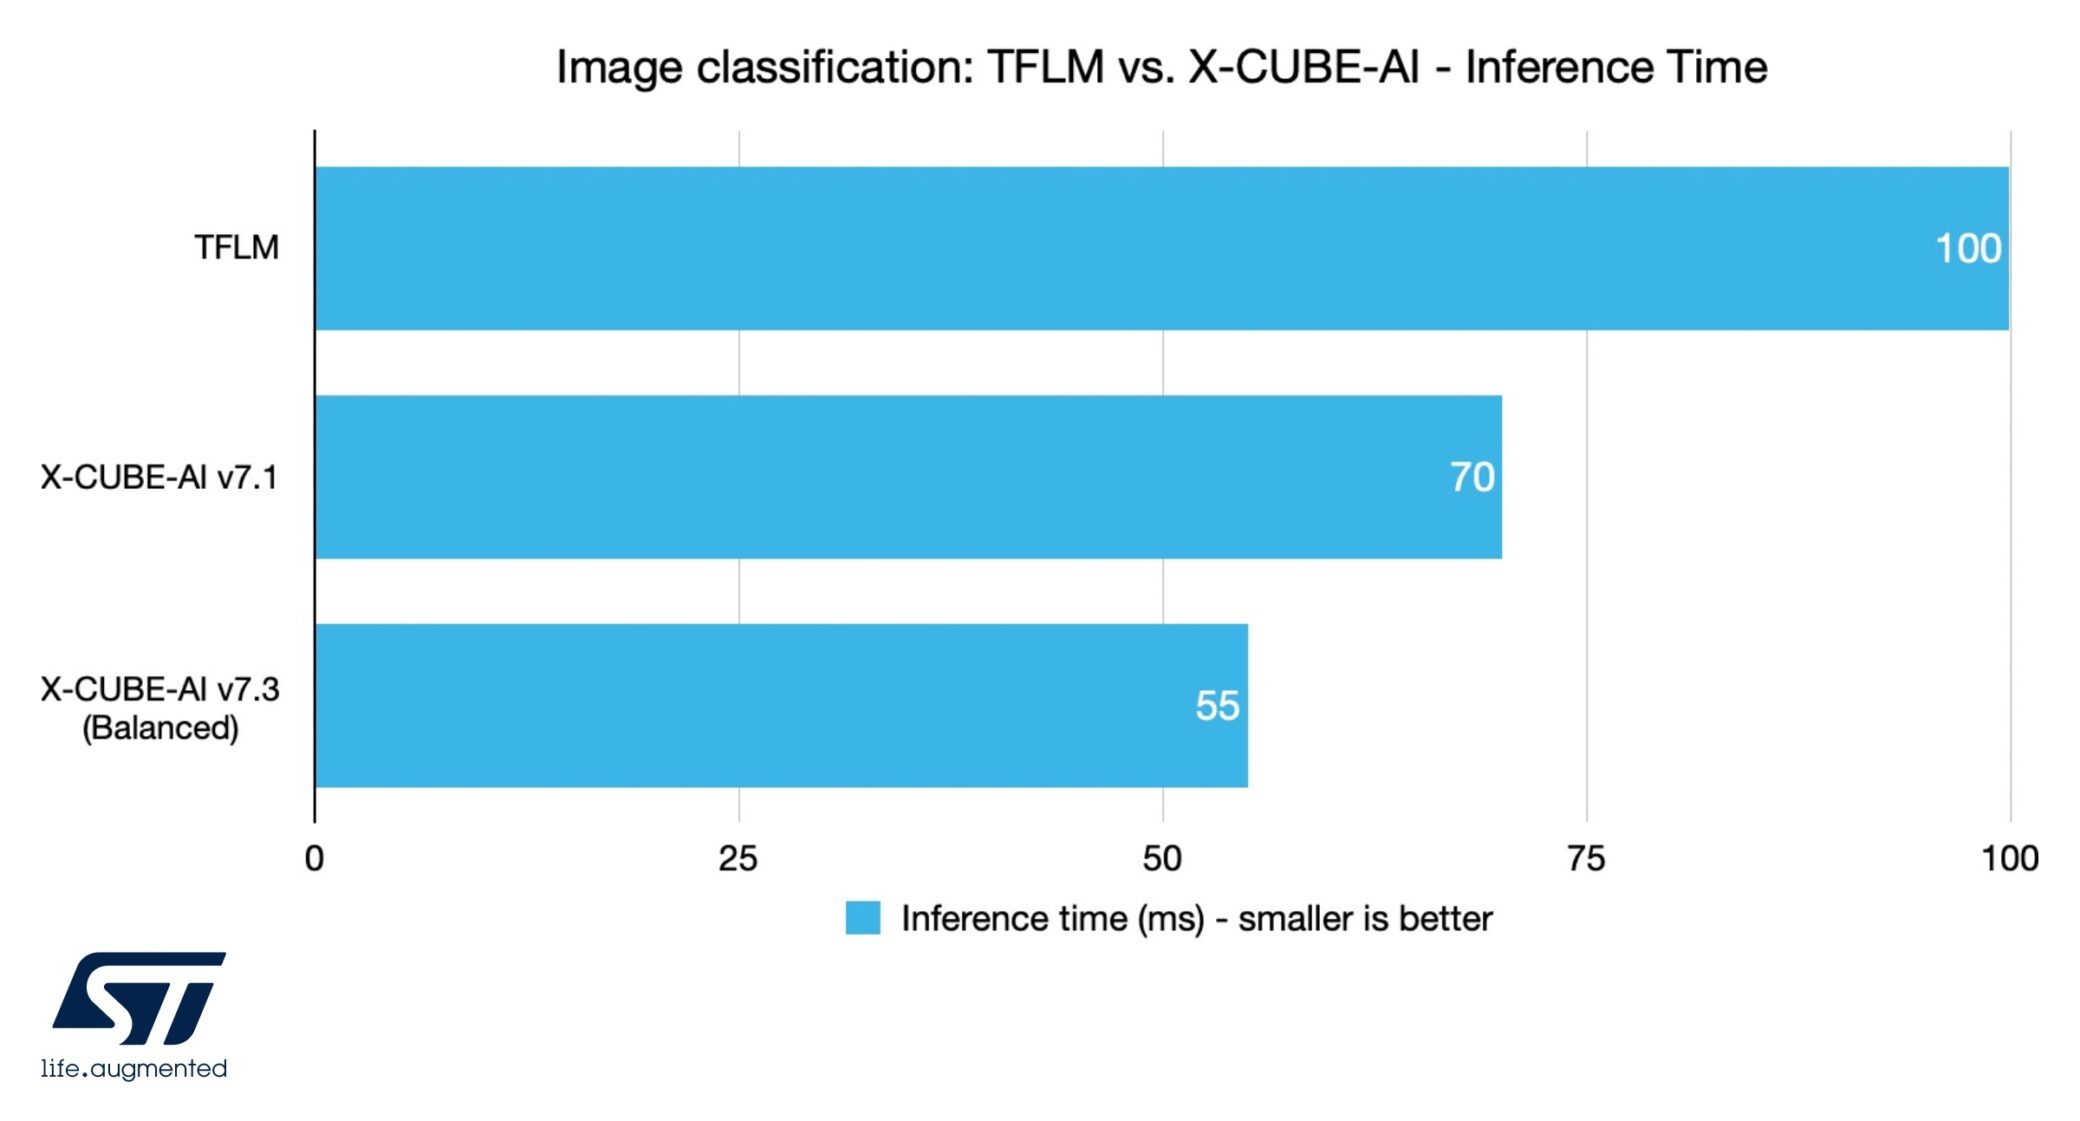 Image classification: TFLM vs. X-CUBE-AI - Inference Time